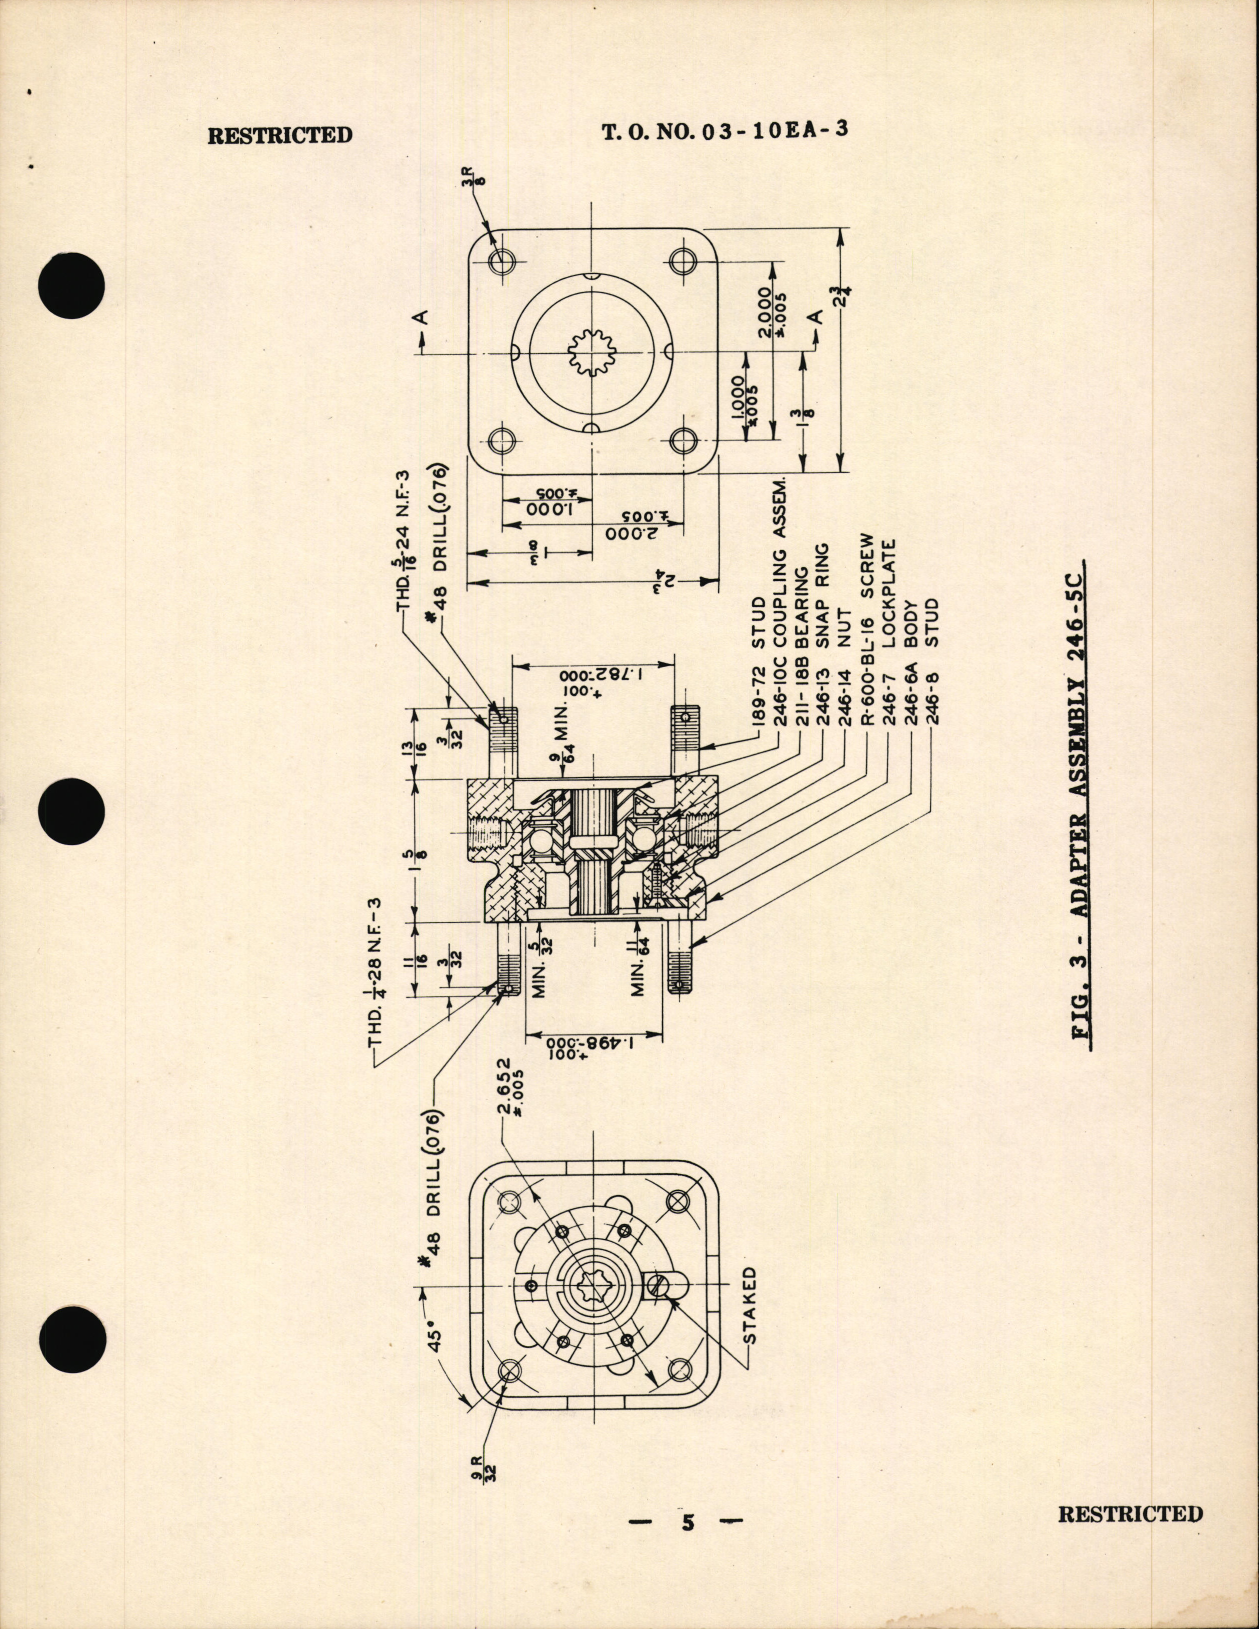 Sample page 7 from AirCorps Library document: Handbook of Instructions with Assembly Parts List for Electric Motor Driven Fuel Pump